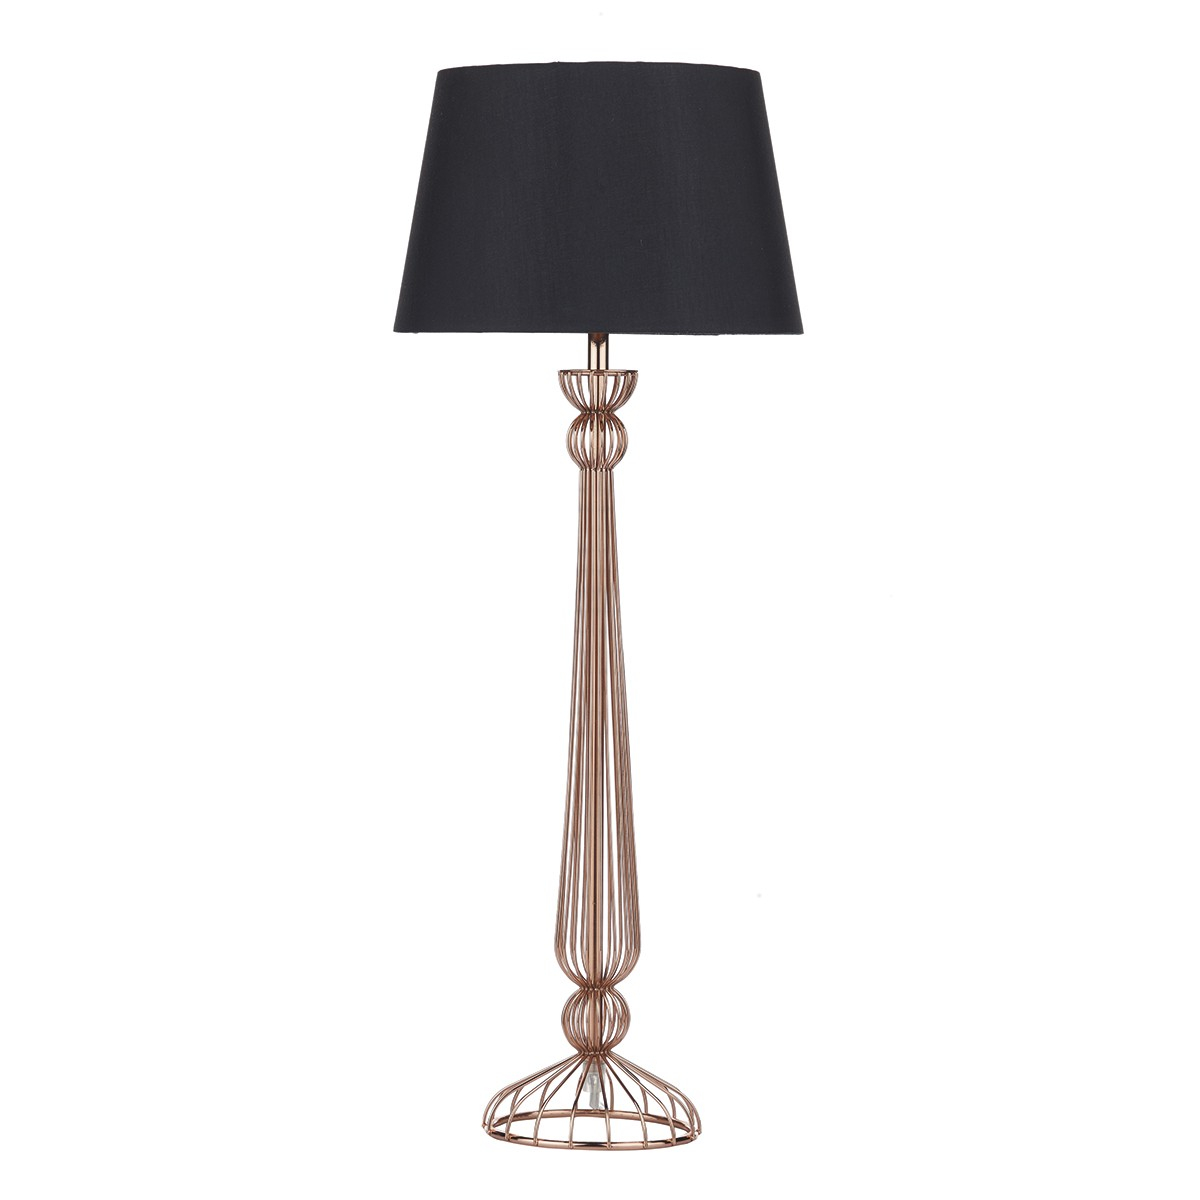 Eddie Table Lamp Polished Copper Complete With Shade regarding sizing 1200 X 1200